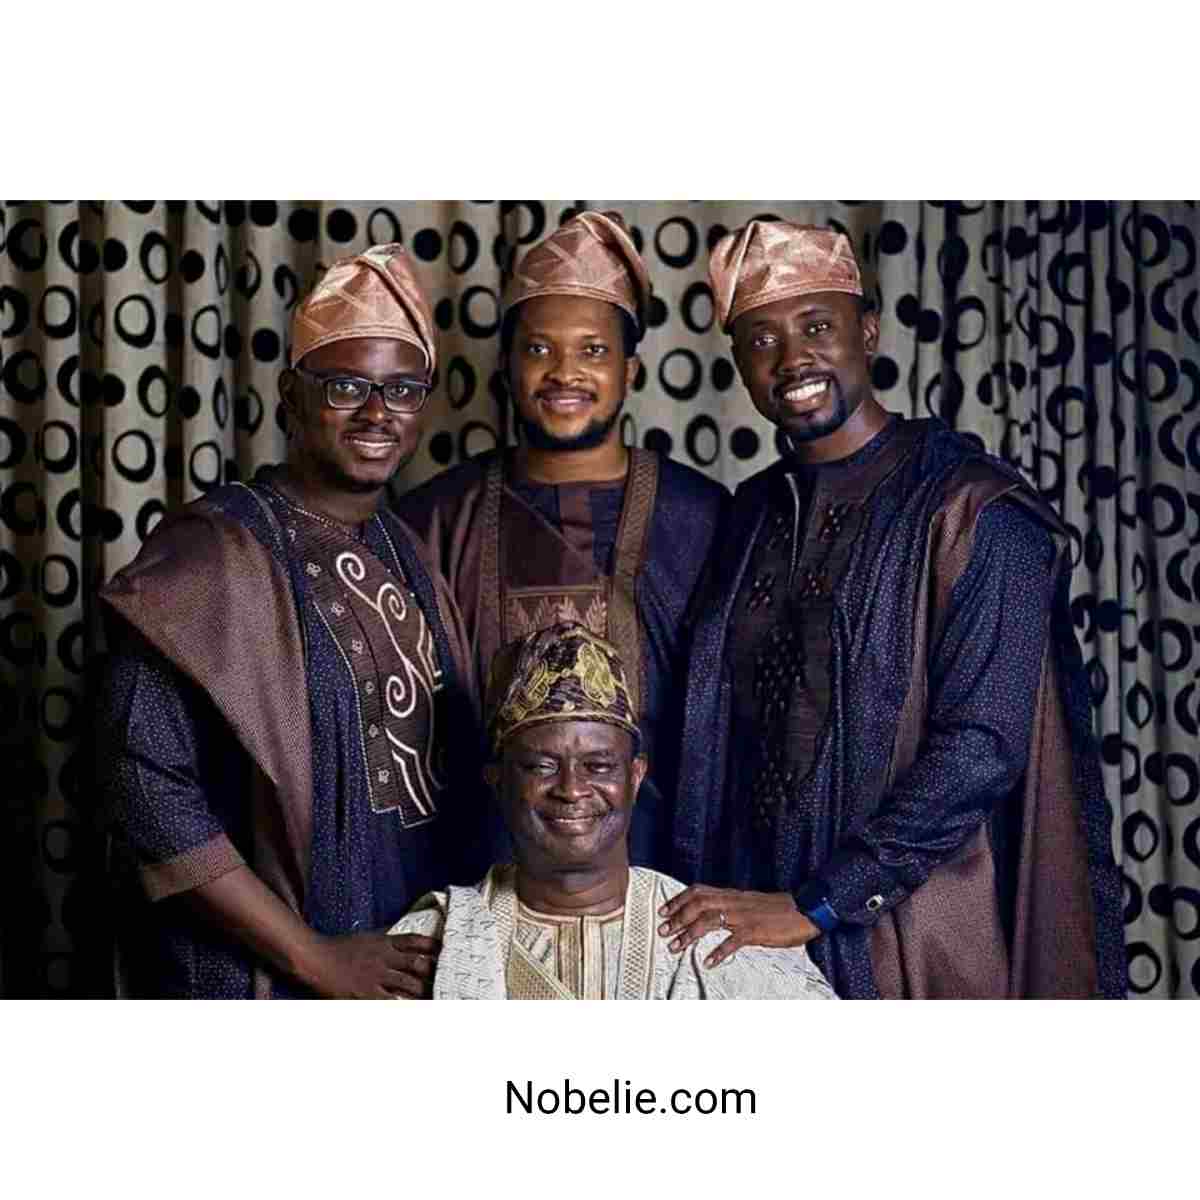 Mike Bamiloye And The Oyor Family Celebrates Father’s Day Together With Beautiful Photo